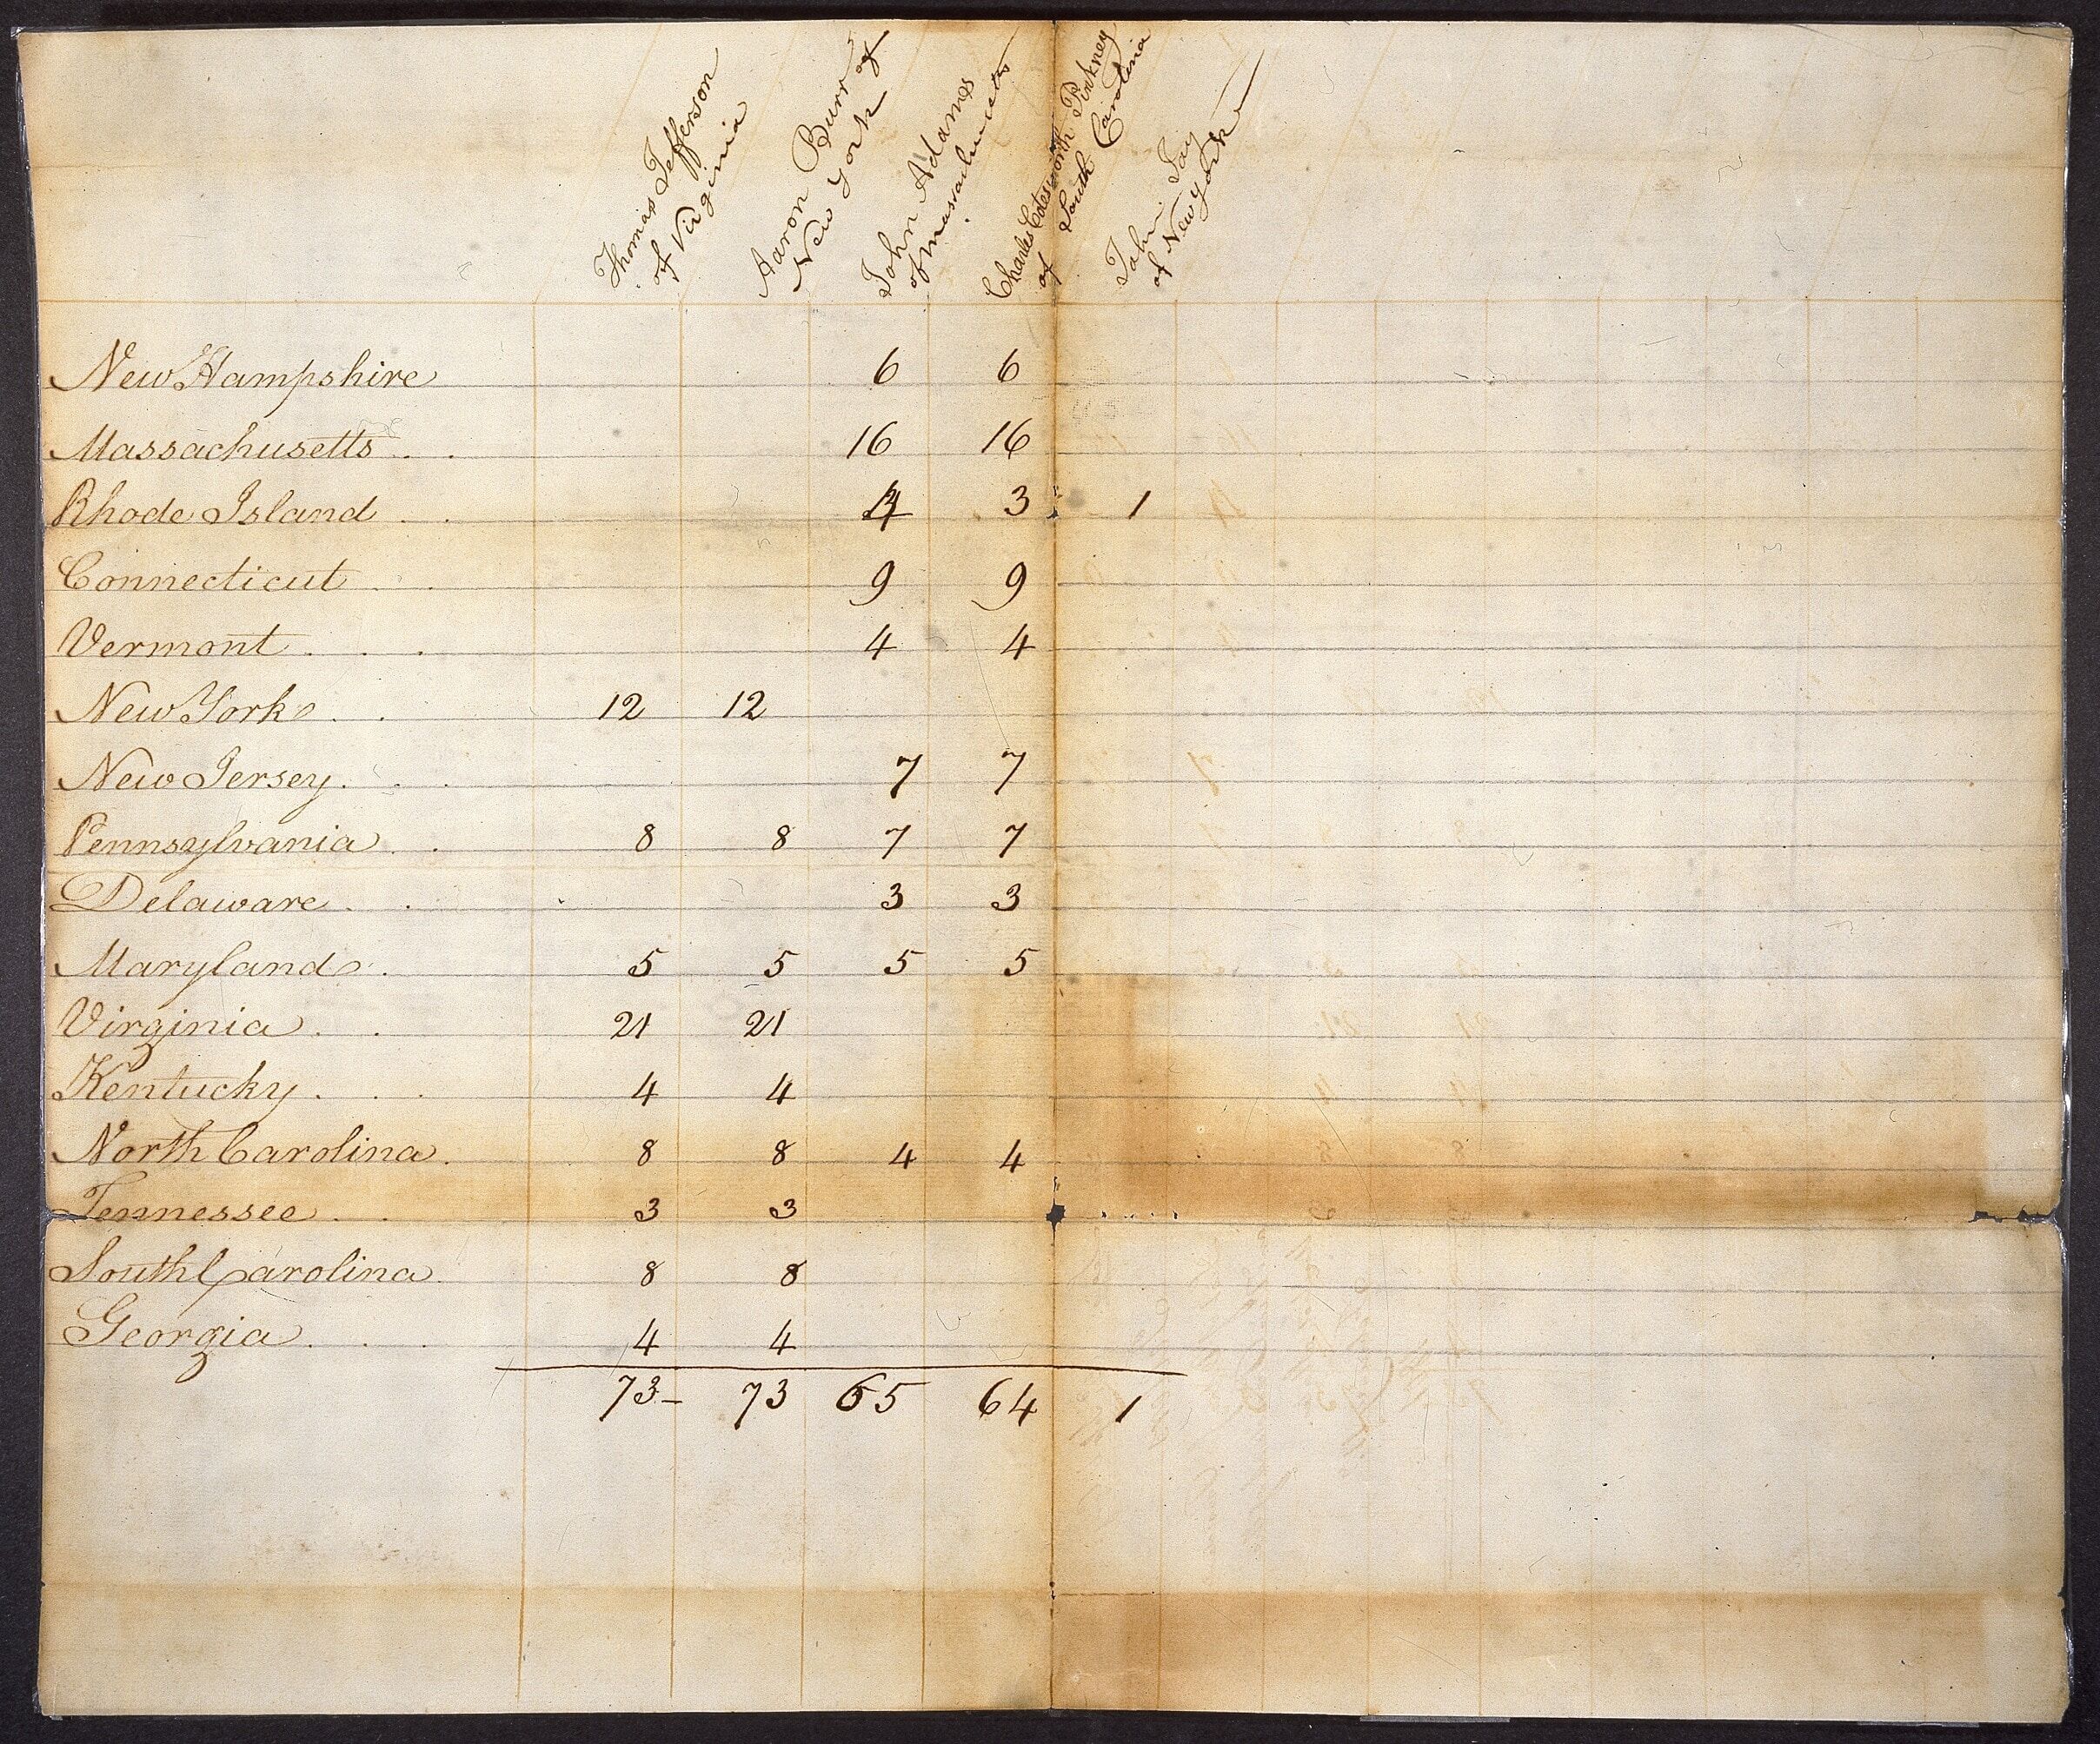 Election of 1800 vote tally shows Jefferson and Burr tied